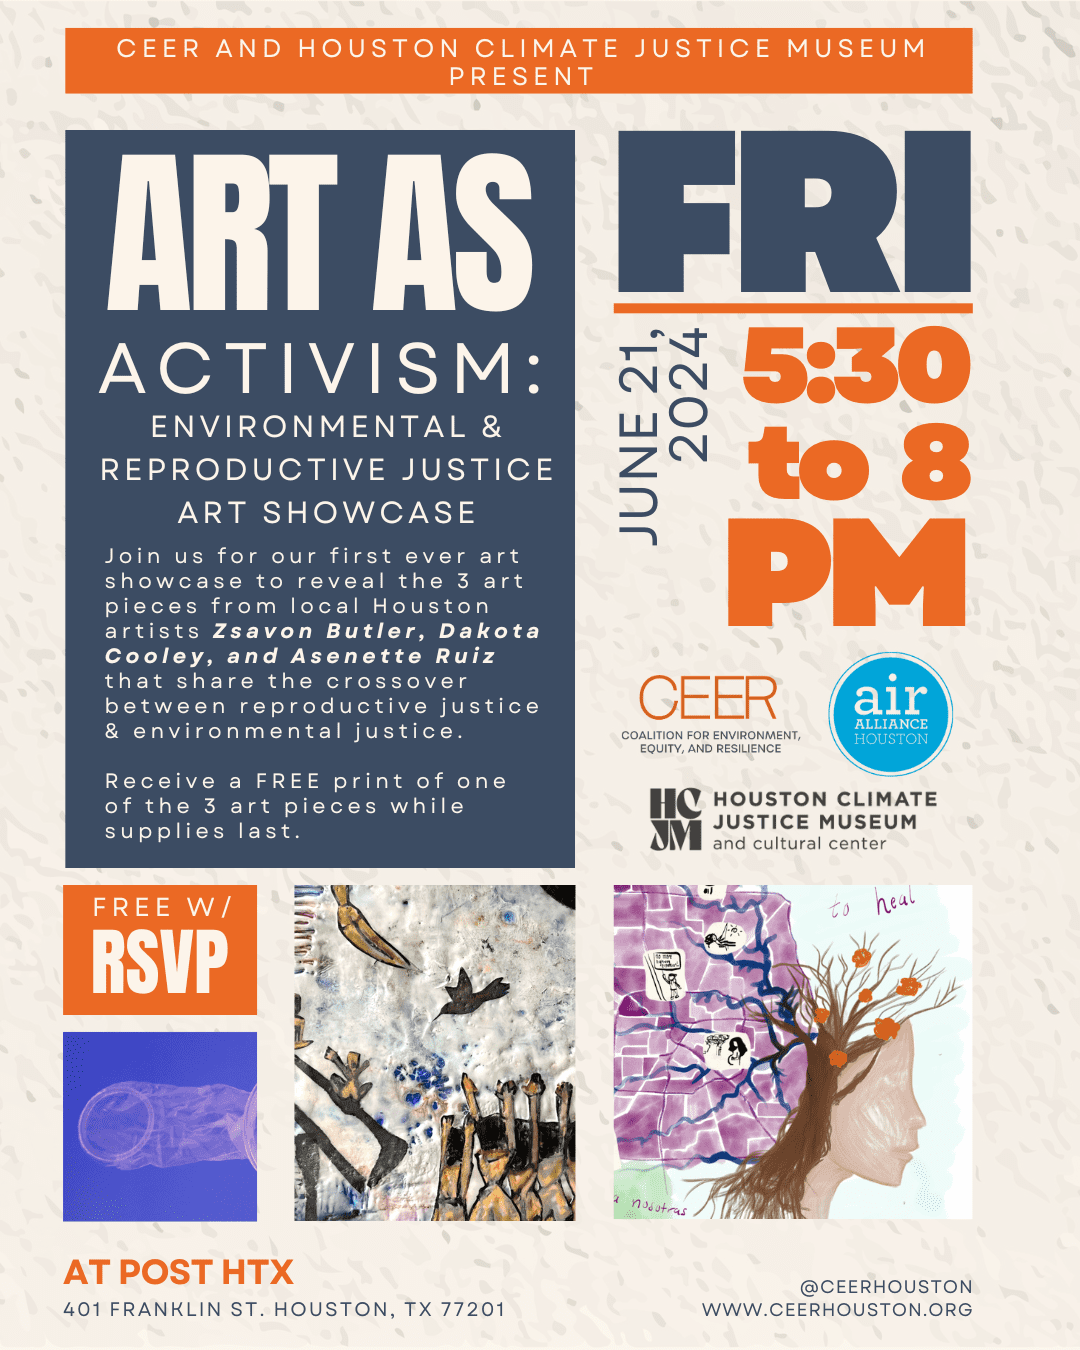 CEER and Houston Climate Justice Museum Present. Art as Activism: Environmental and Reproductive Justice Art Showcase. Join us for our first ever art showcase to reveal the 3 art pieces from local Houston artists Zsavon Butler, Dakota Cooley, and Asenette Ruiz that share the crossover between reproductive justice & environmental justice. Receive a FREE print of one of the 3 art pieces while supplies last. Free with RSVP. Friday, June 21,2024. 5:30 to 8 PM. POST HTX 401 Franklin St. Houston, TX 77021. @CeerHouston. www.ceerhouston.org